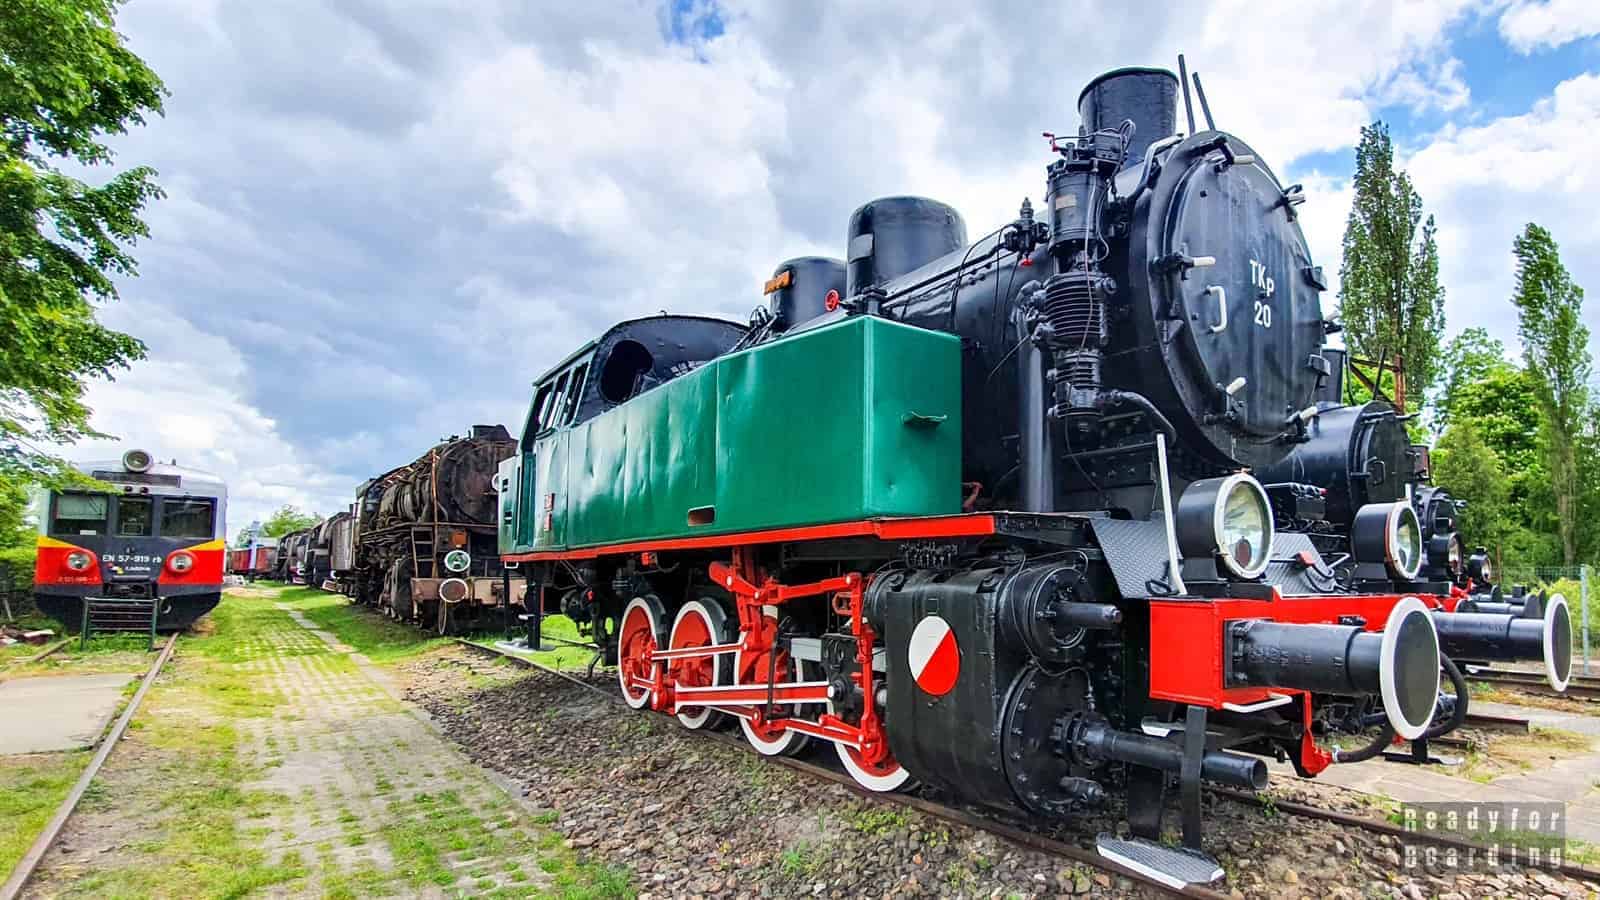 The open-air museum of locomotives in Karsznice - Zduńska Wola